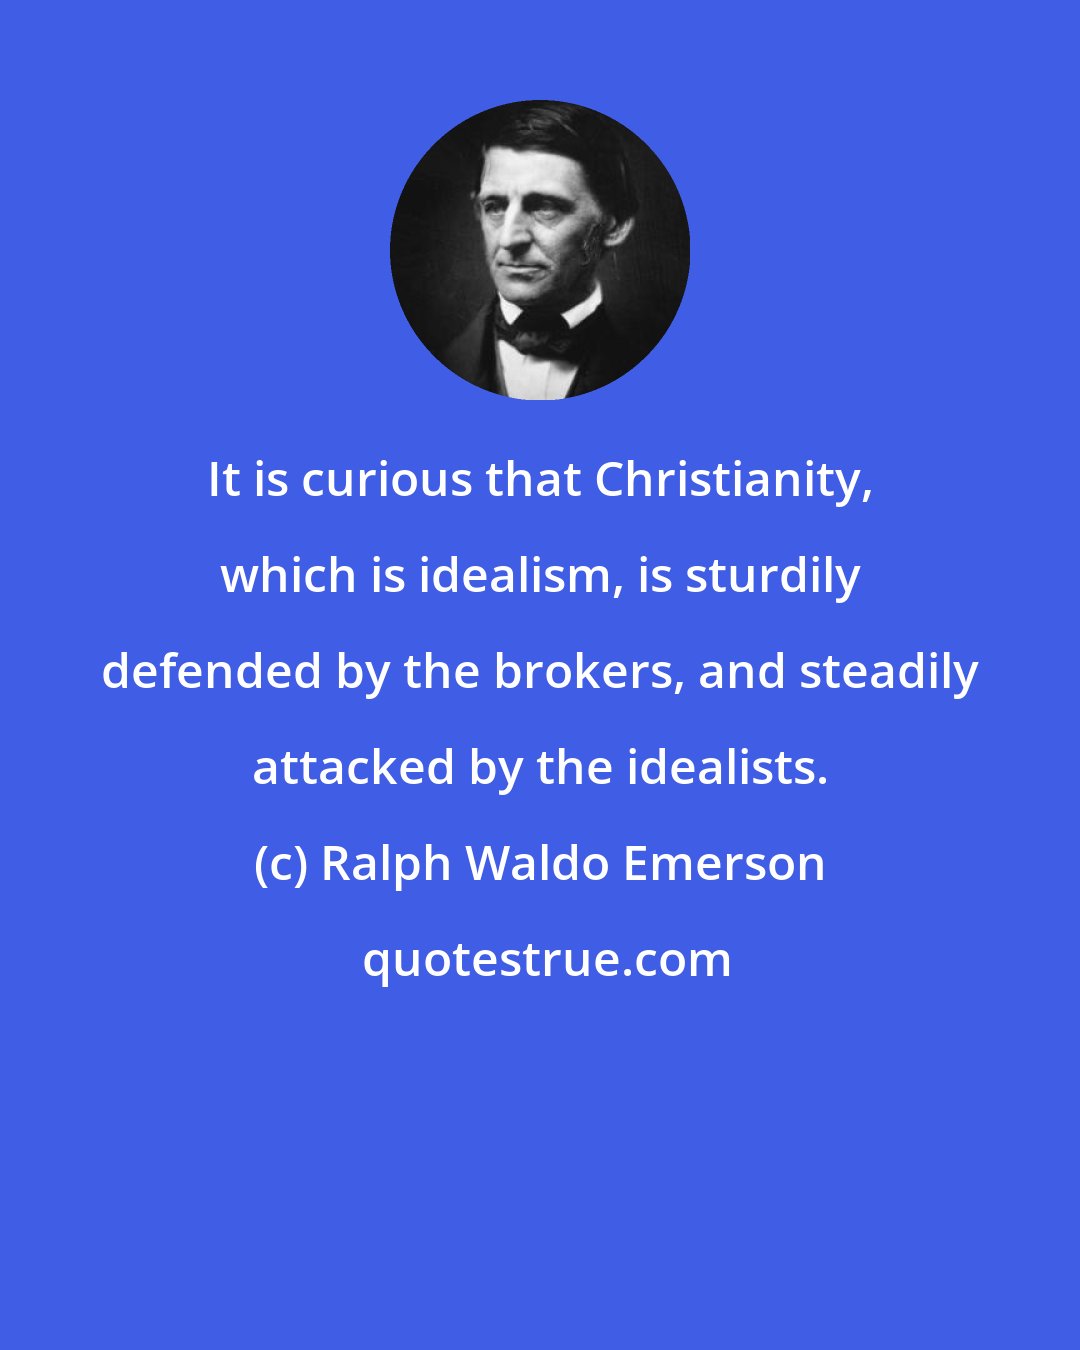 Ralph Waldo Emerson: It is curious that Christianity, which is idealism, is sturdily defended by the brokers, and steadily attacked by the idealists.